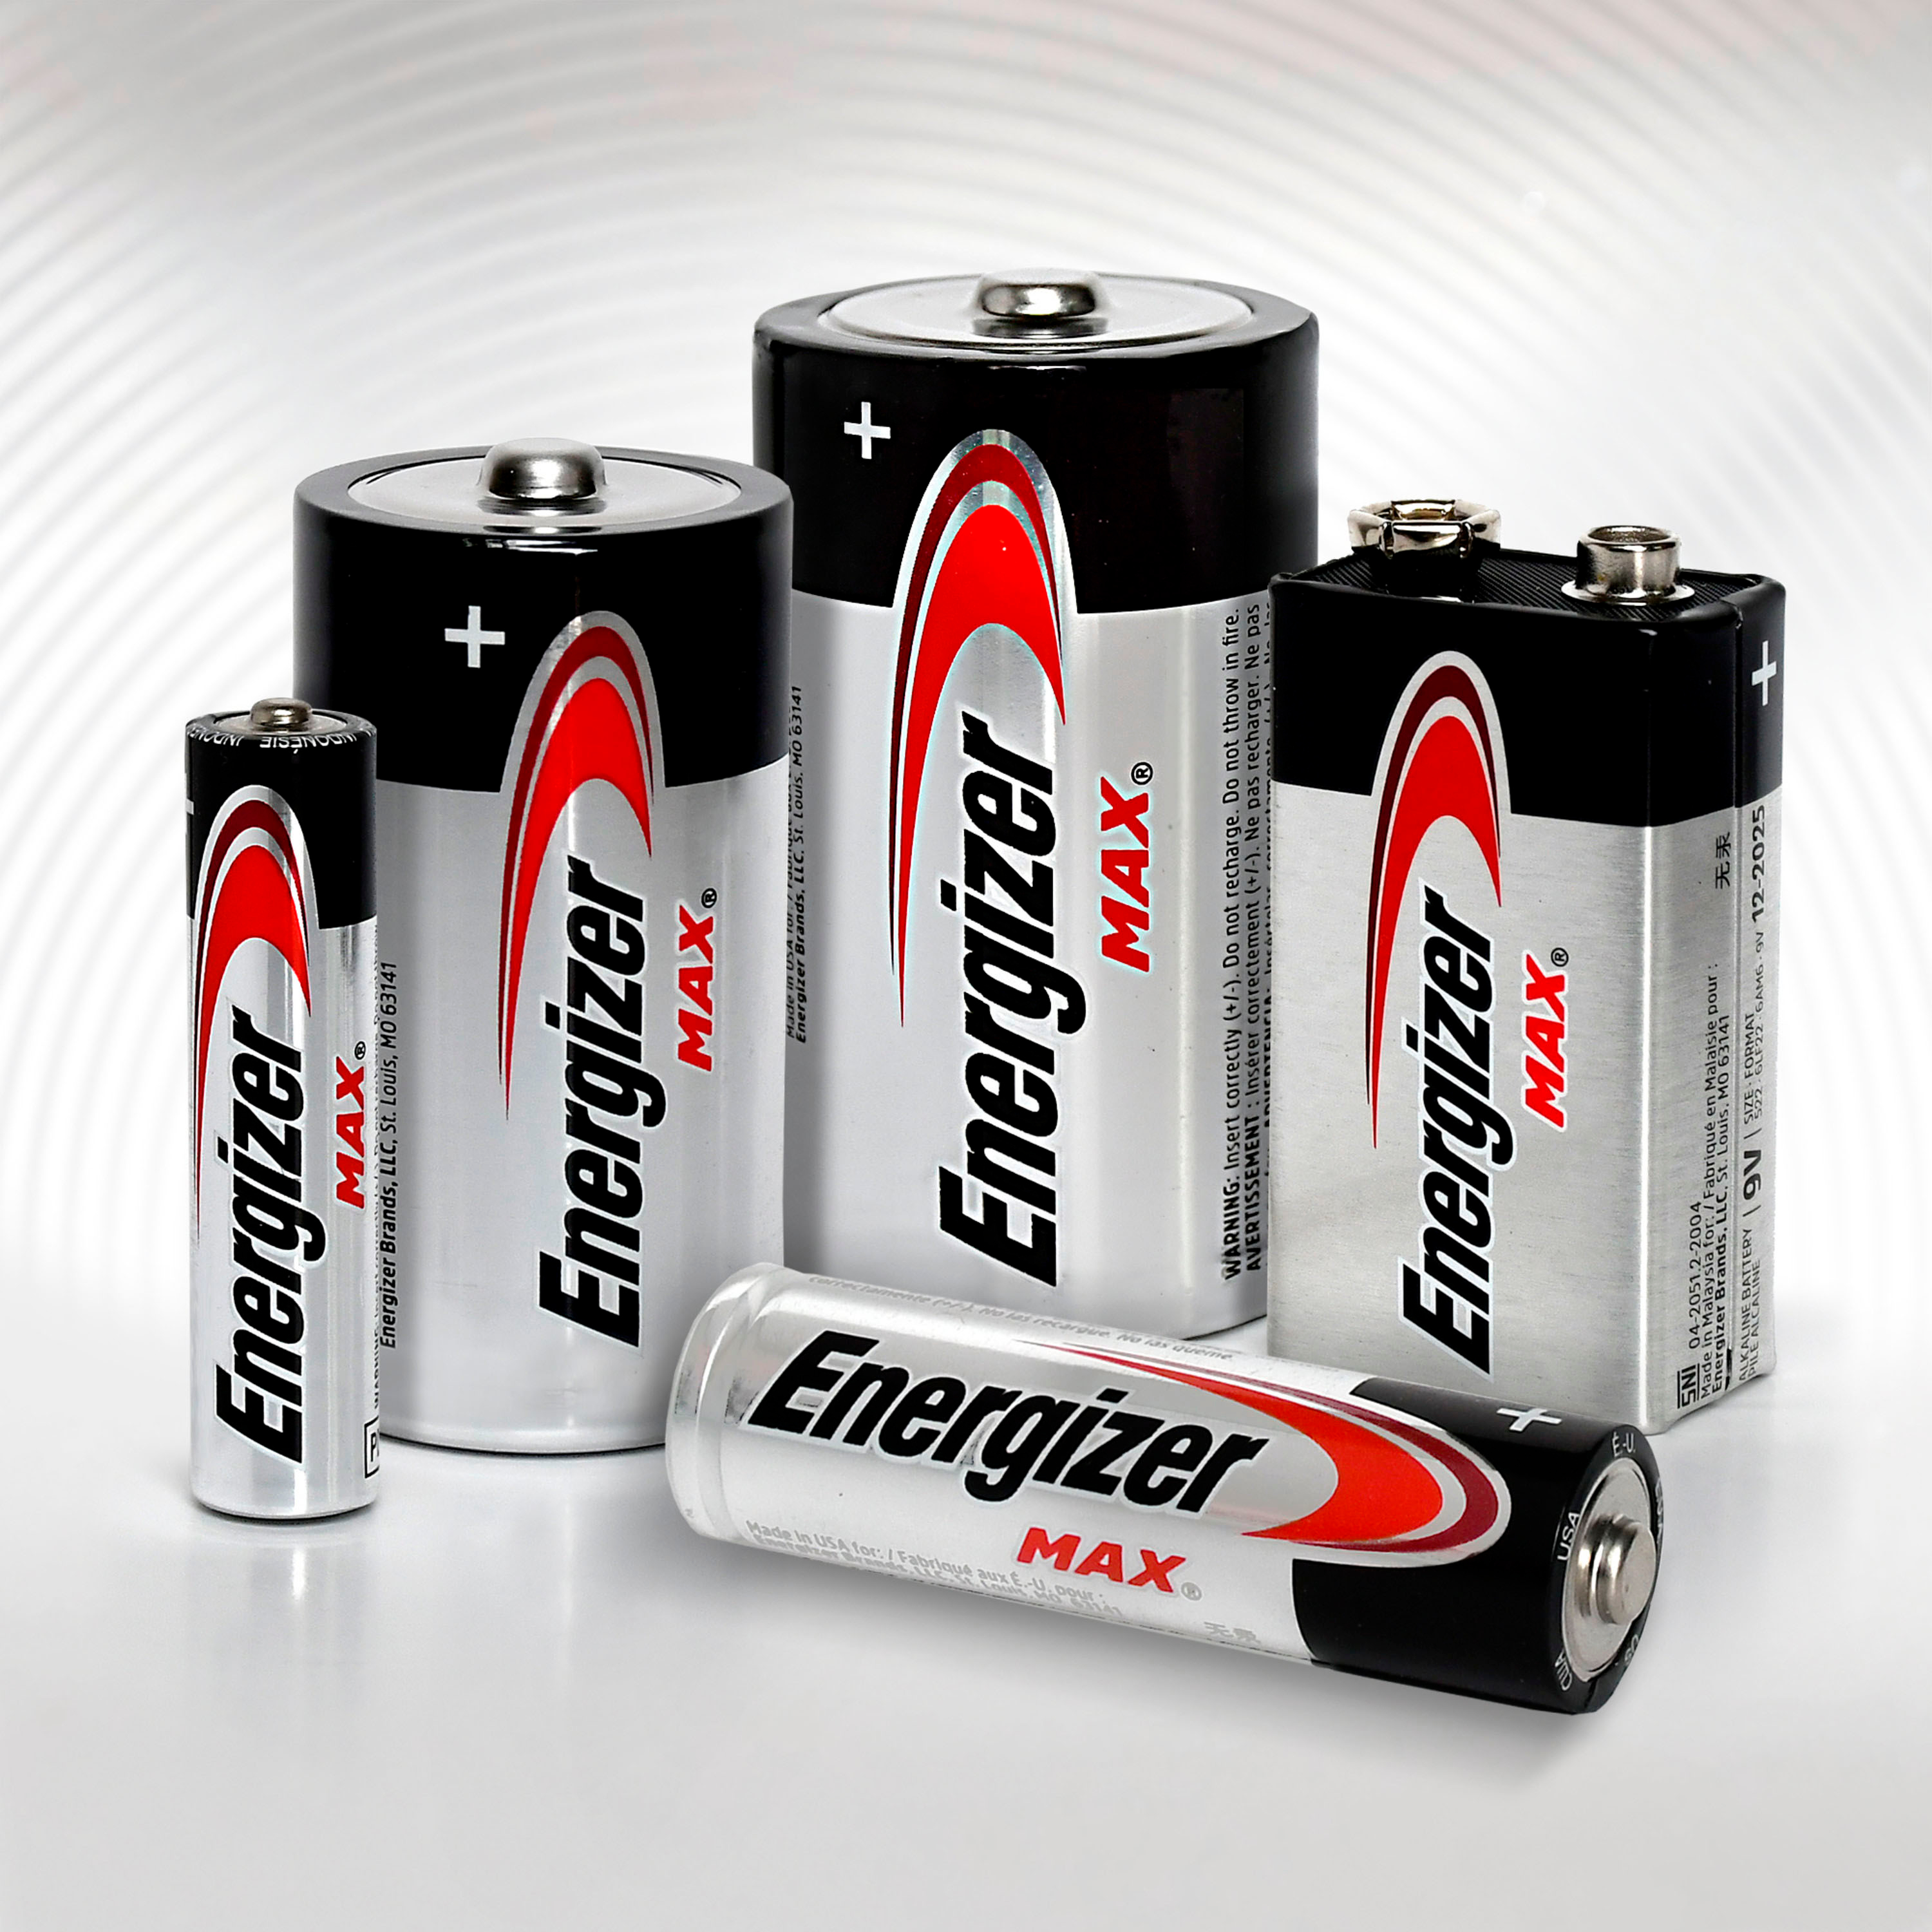 Energizer Max C-Cell Alkaline Batteries - 8 pack